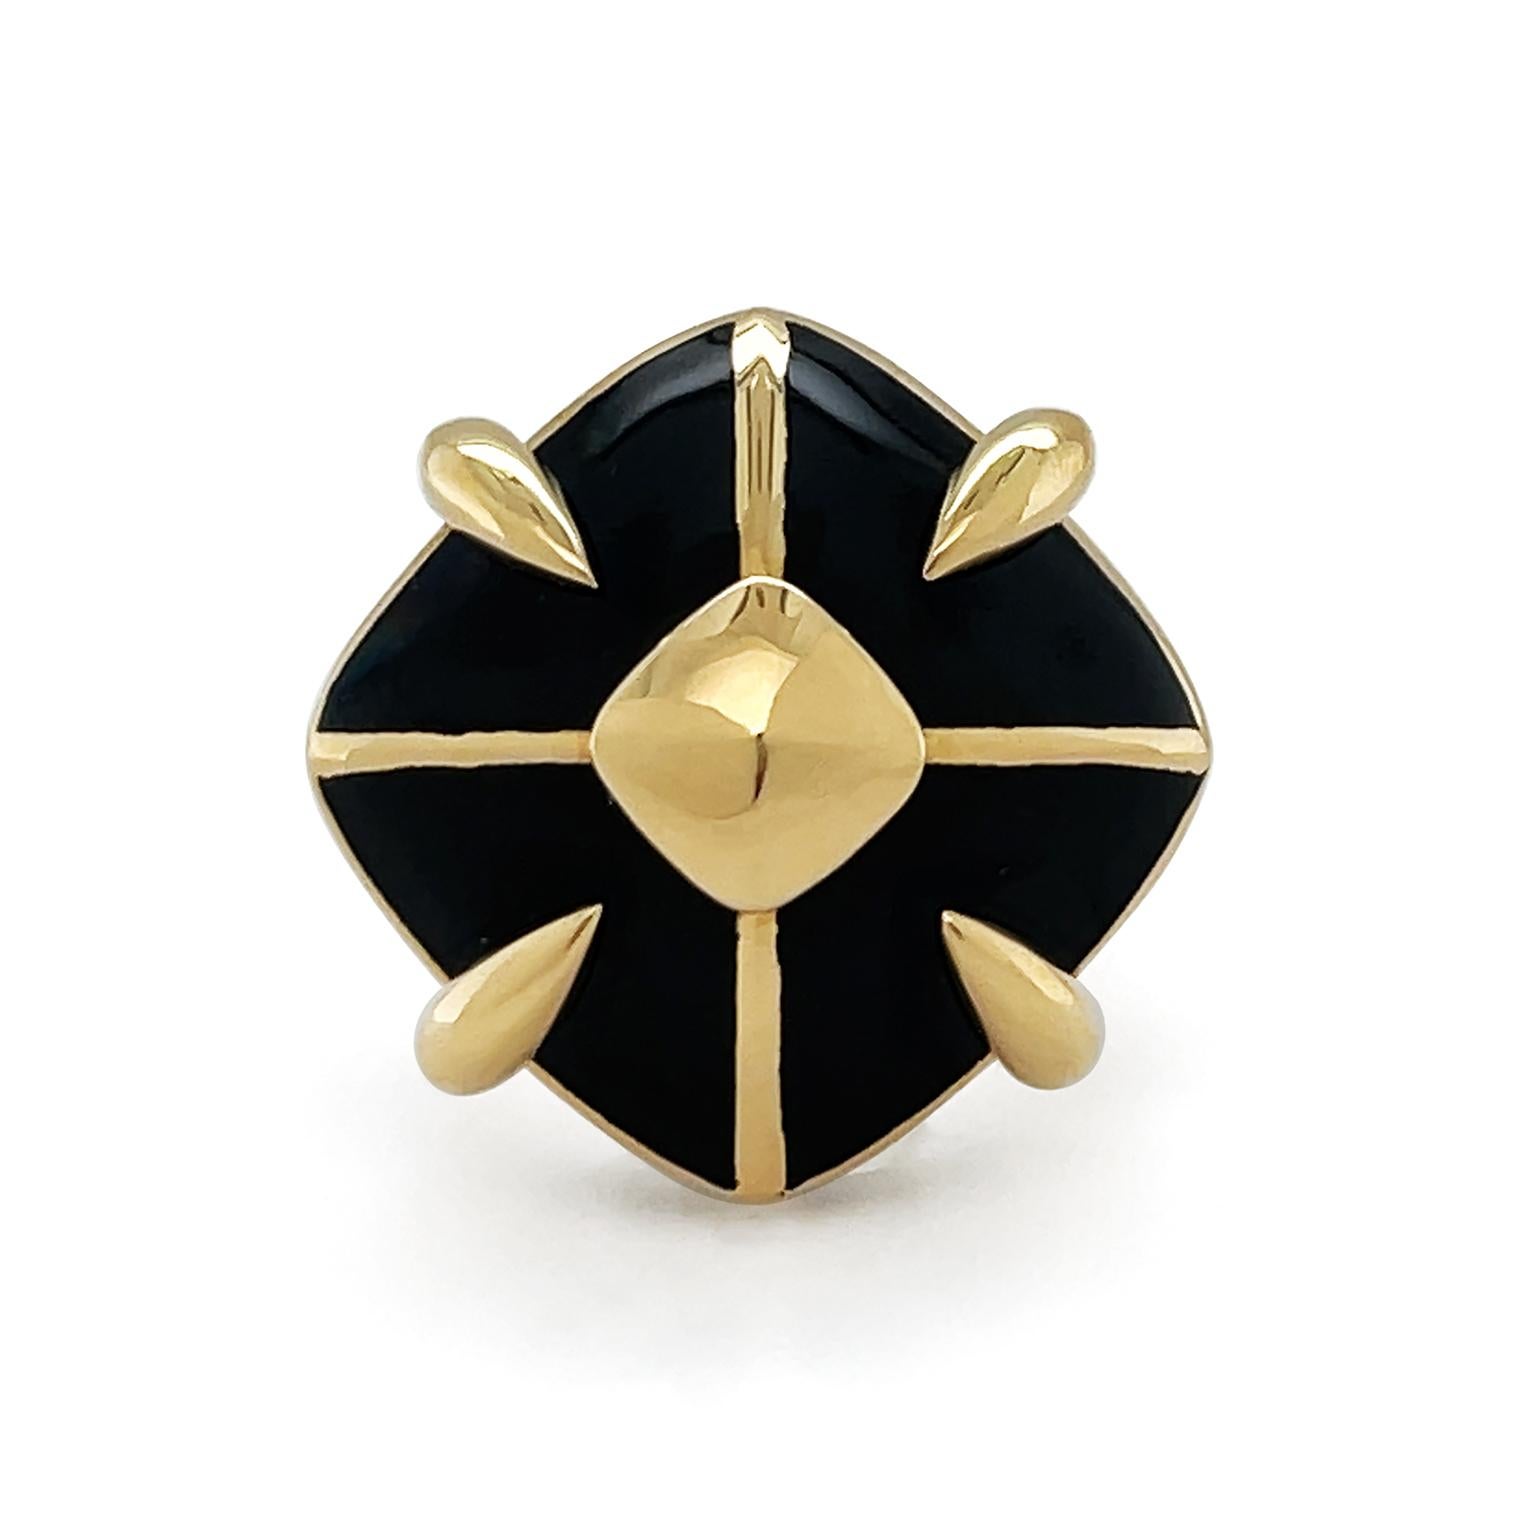 Black enamel joins with the scintillation of 18k yellow gold for this ring. Black enamel in a rhombus silhouette serves as the crown, while 18k yellow gold strands form four sections with a gold claw securing the enamel on each side. A polished